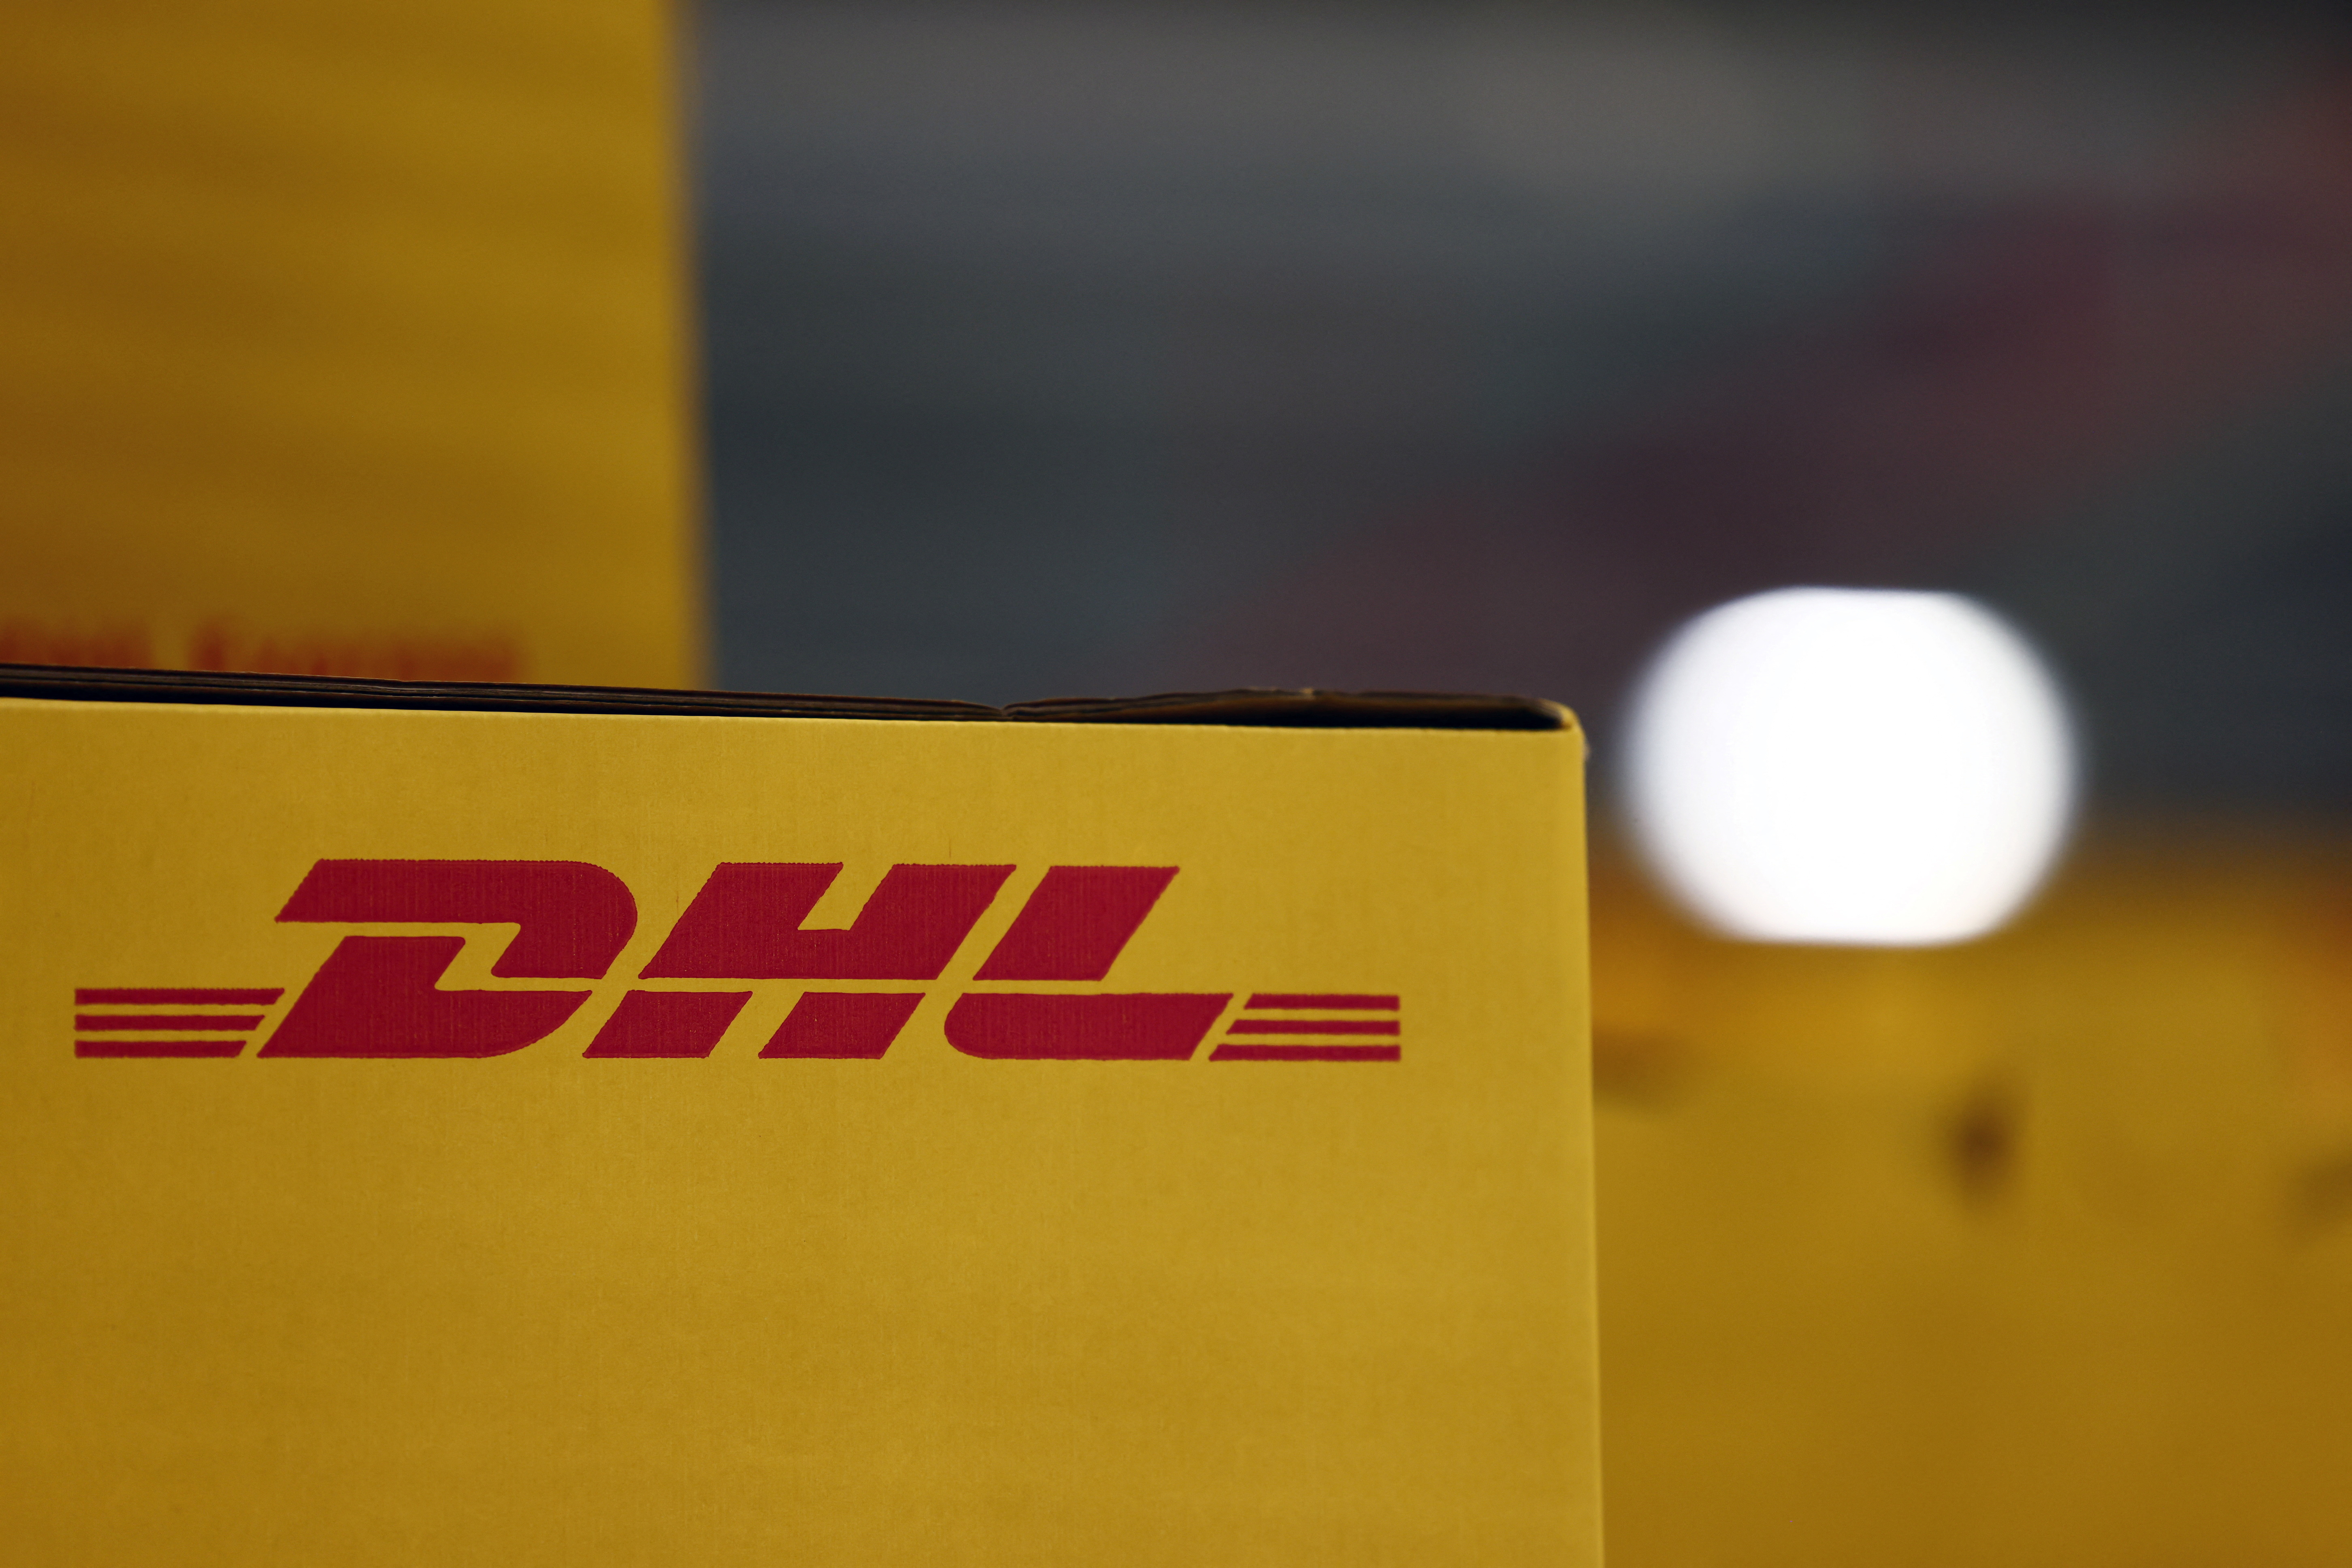 Dhl express americas to invest mln in operating capacity this year